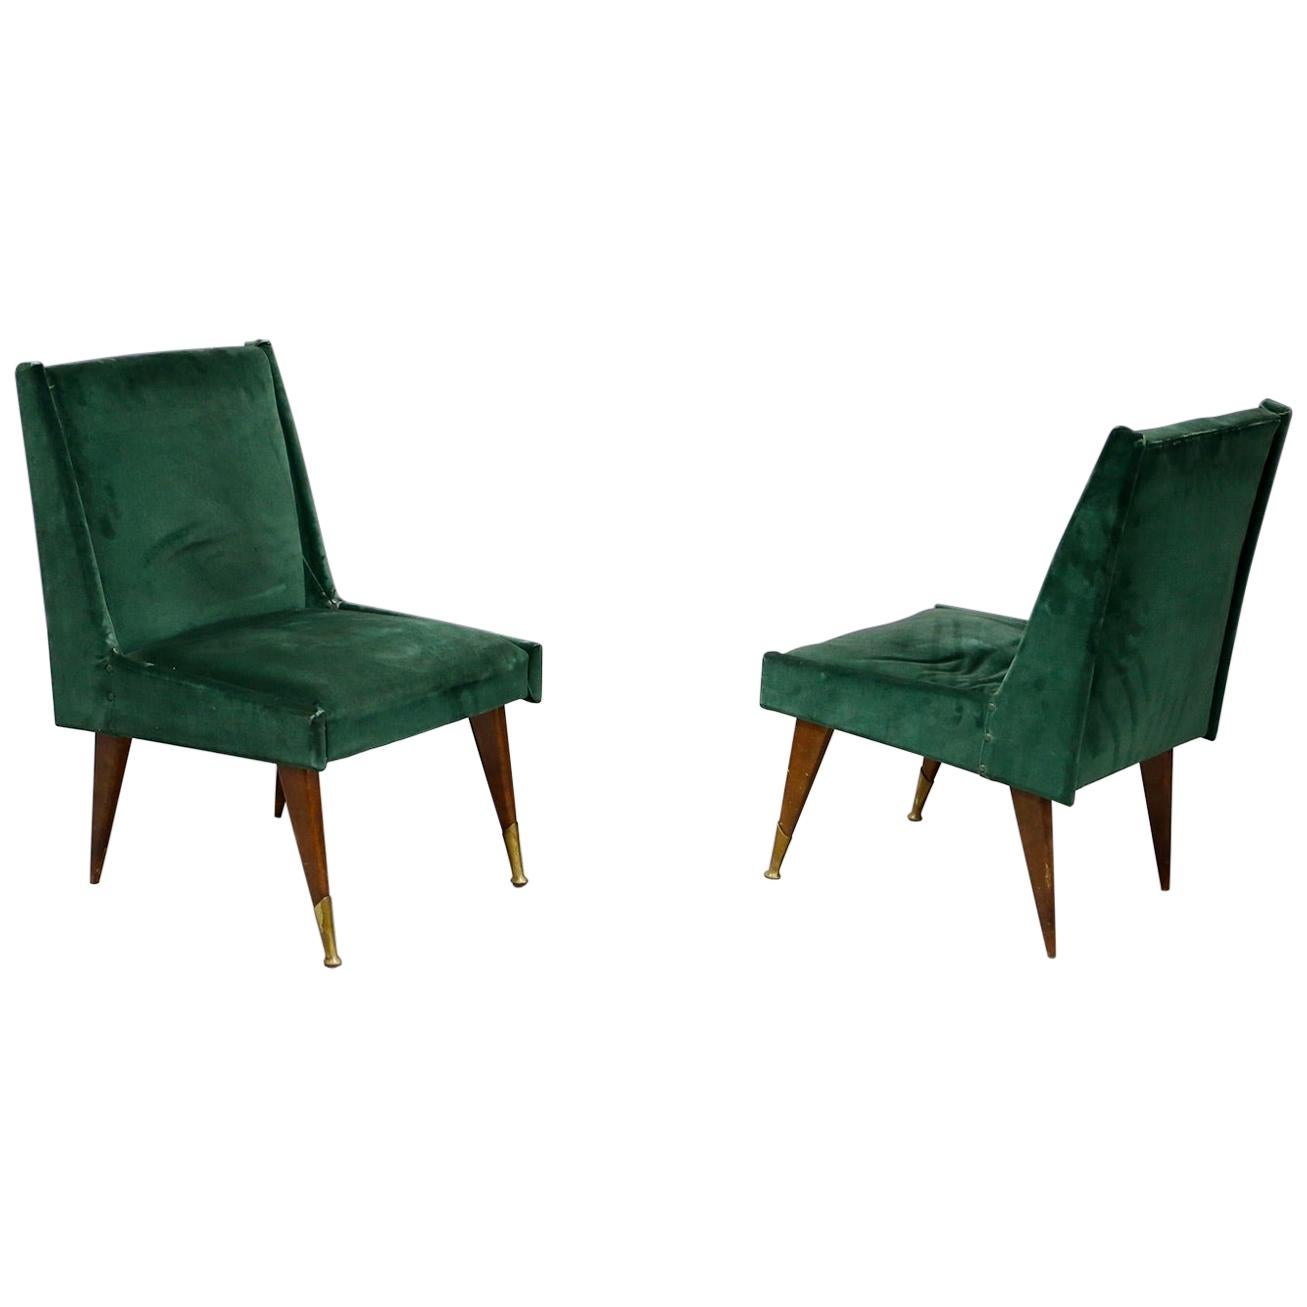 Pair of Midcentury Armchairs by Carlo Pagani in Original Fabric and Wood, 1950s